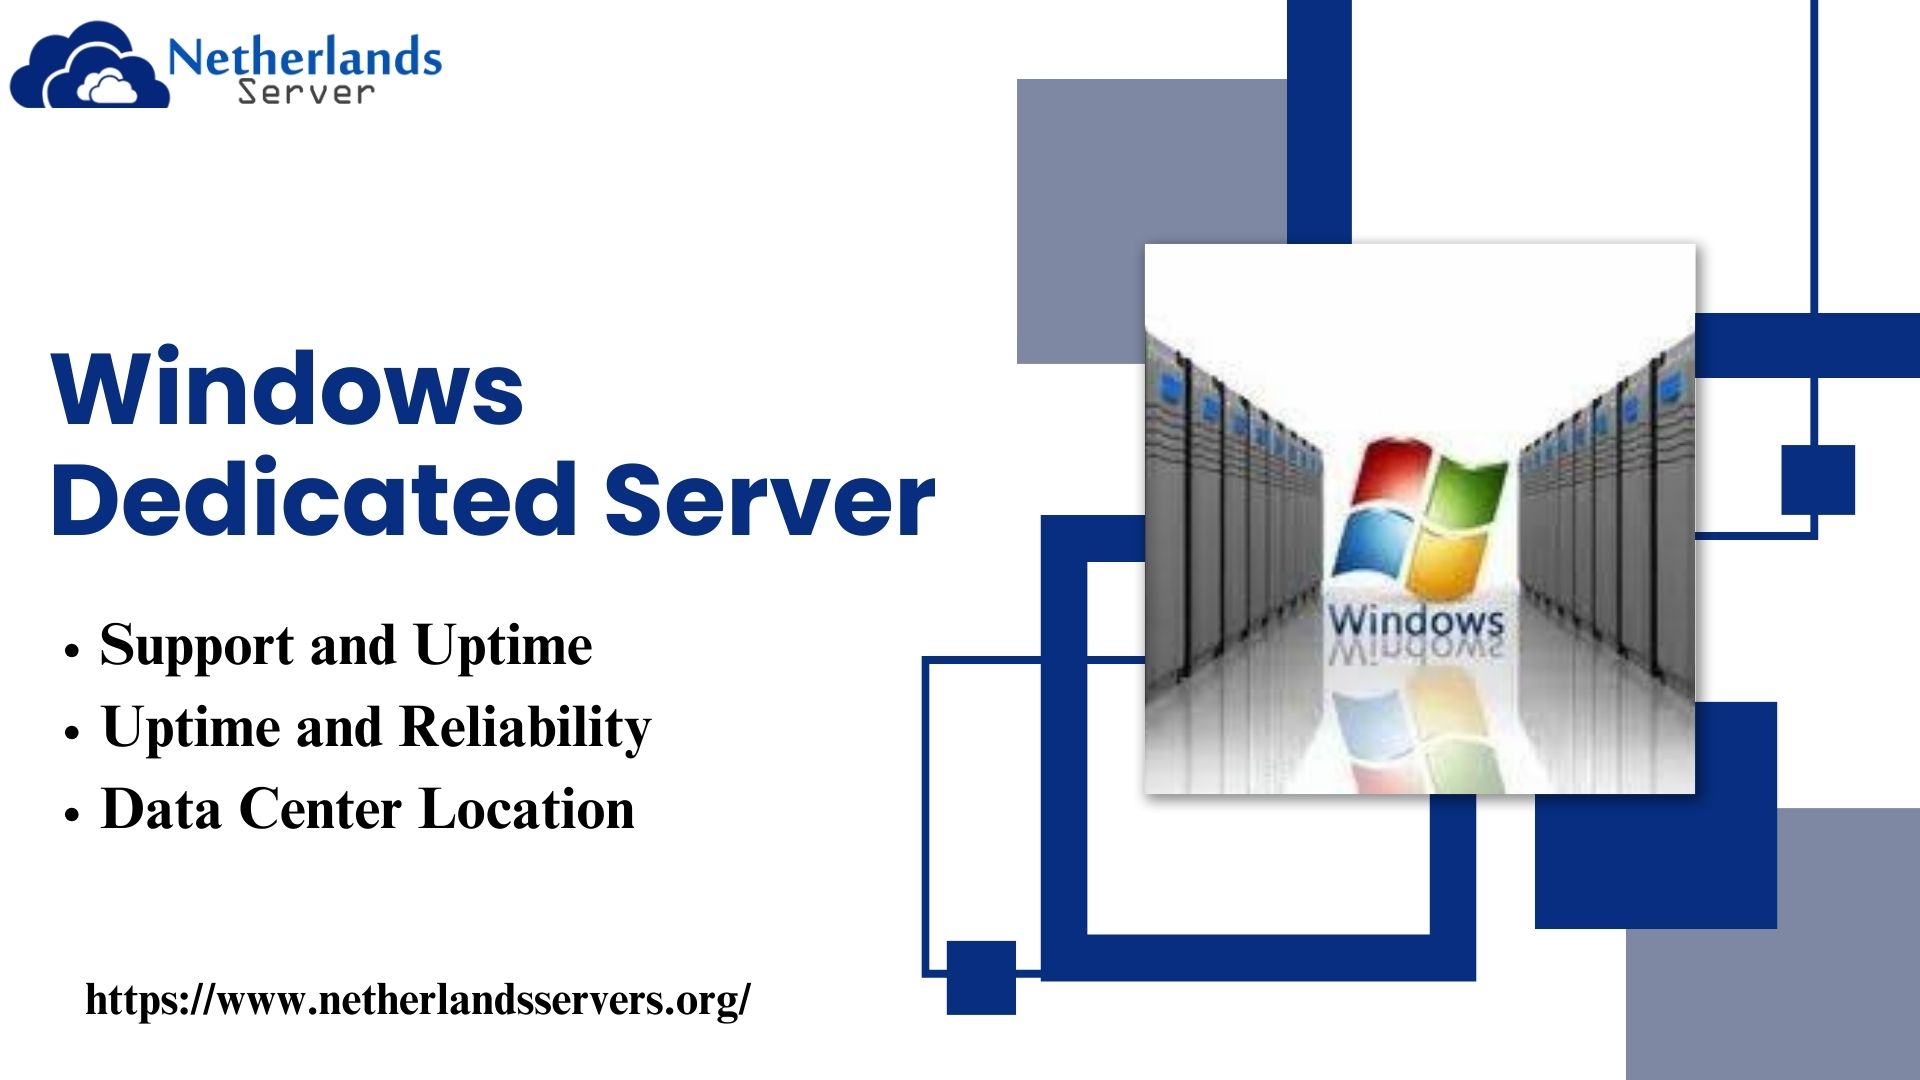 Optimize Your Hosting with Windows Dedicated Server Solutions